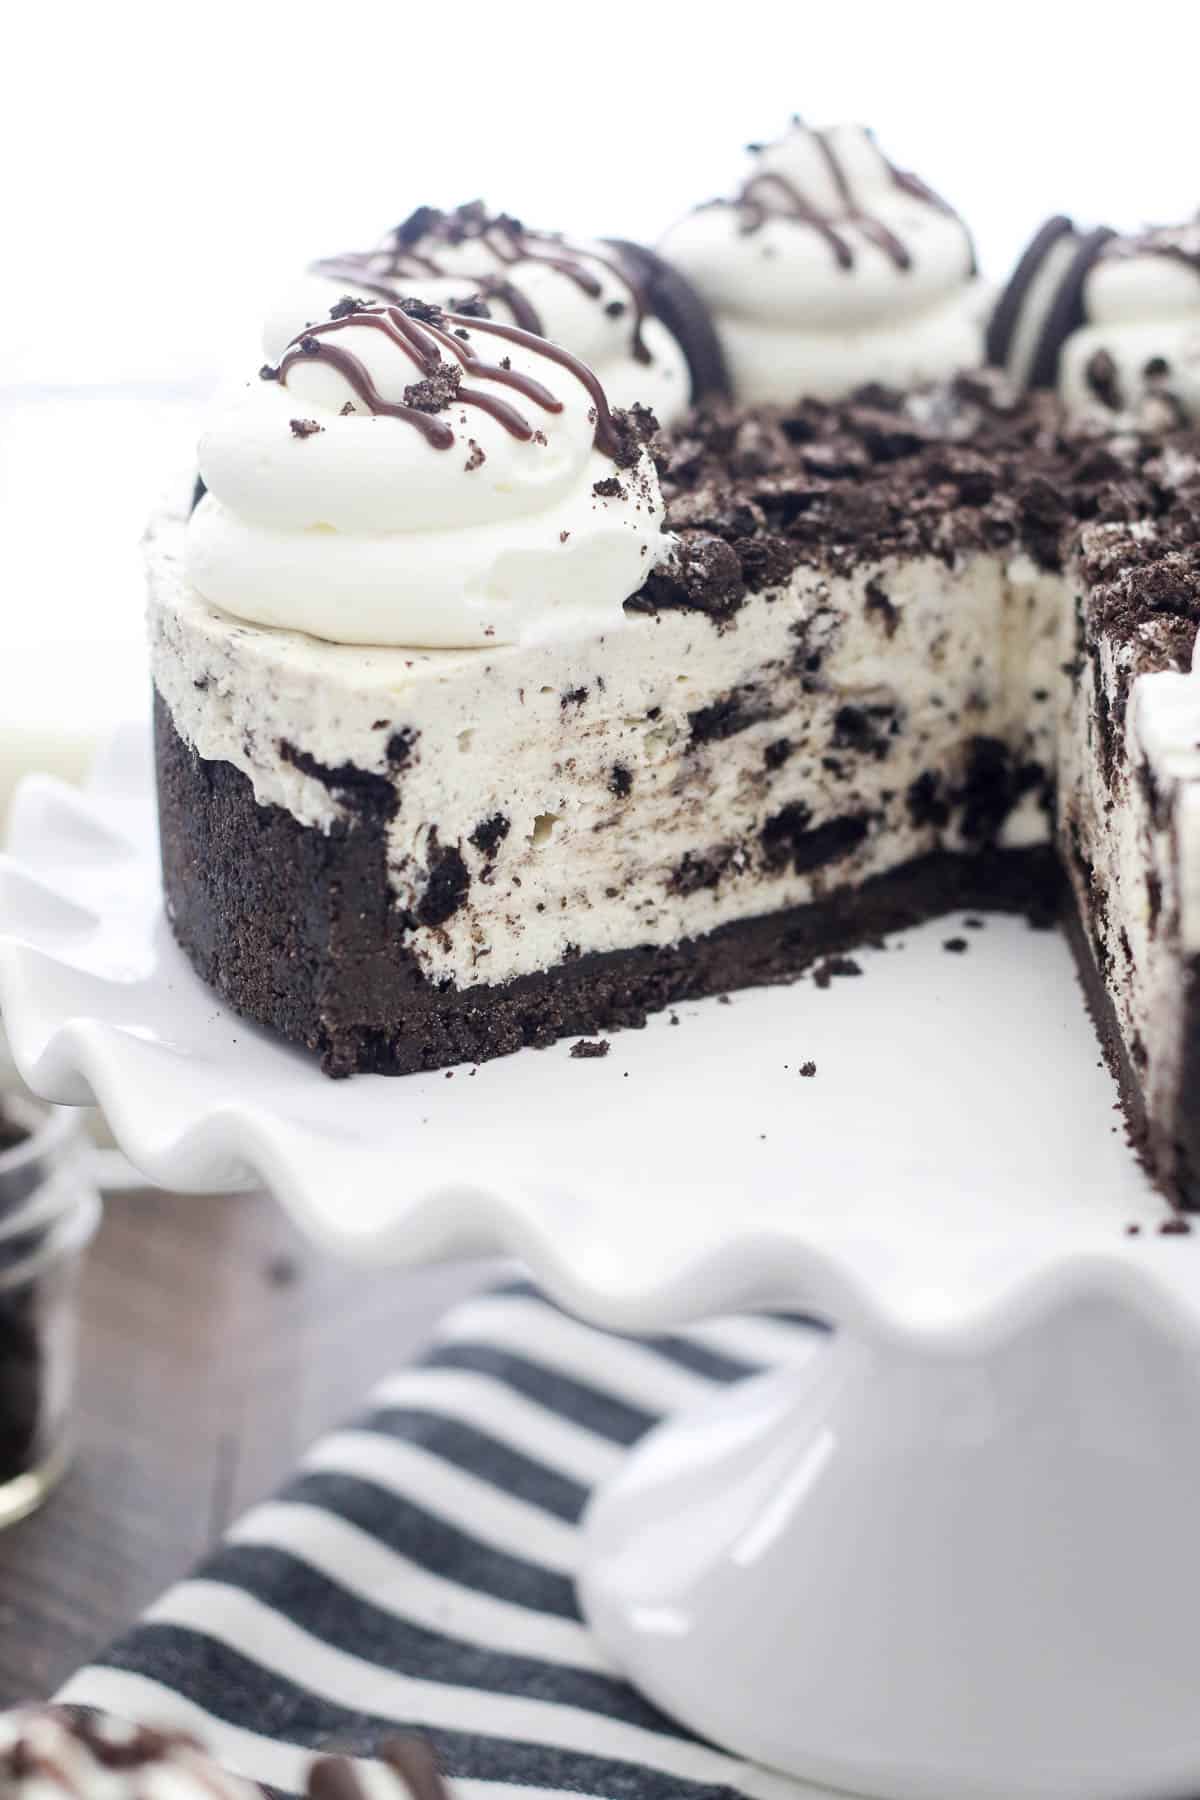 No-bake Oreo cheesecake on a white cake stand, topped with whipped cream swirls, Oreo cookies, and fudge sauce, with a large slice missing.